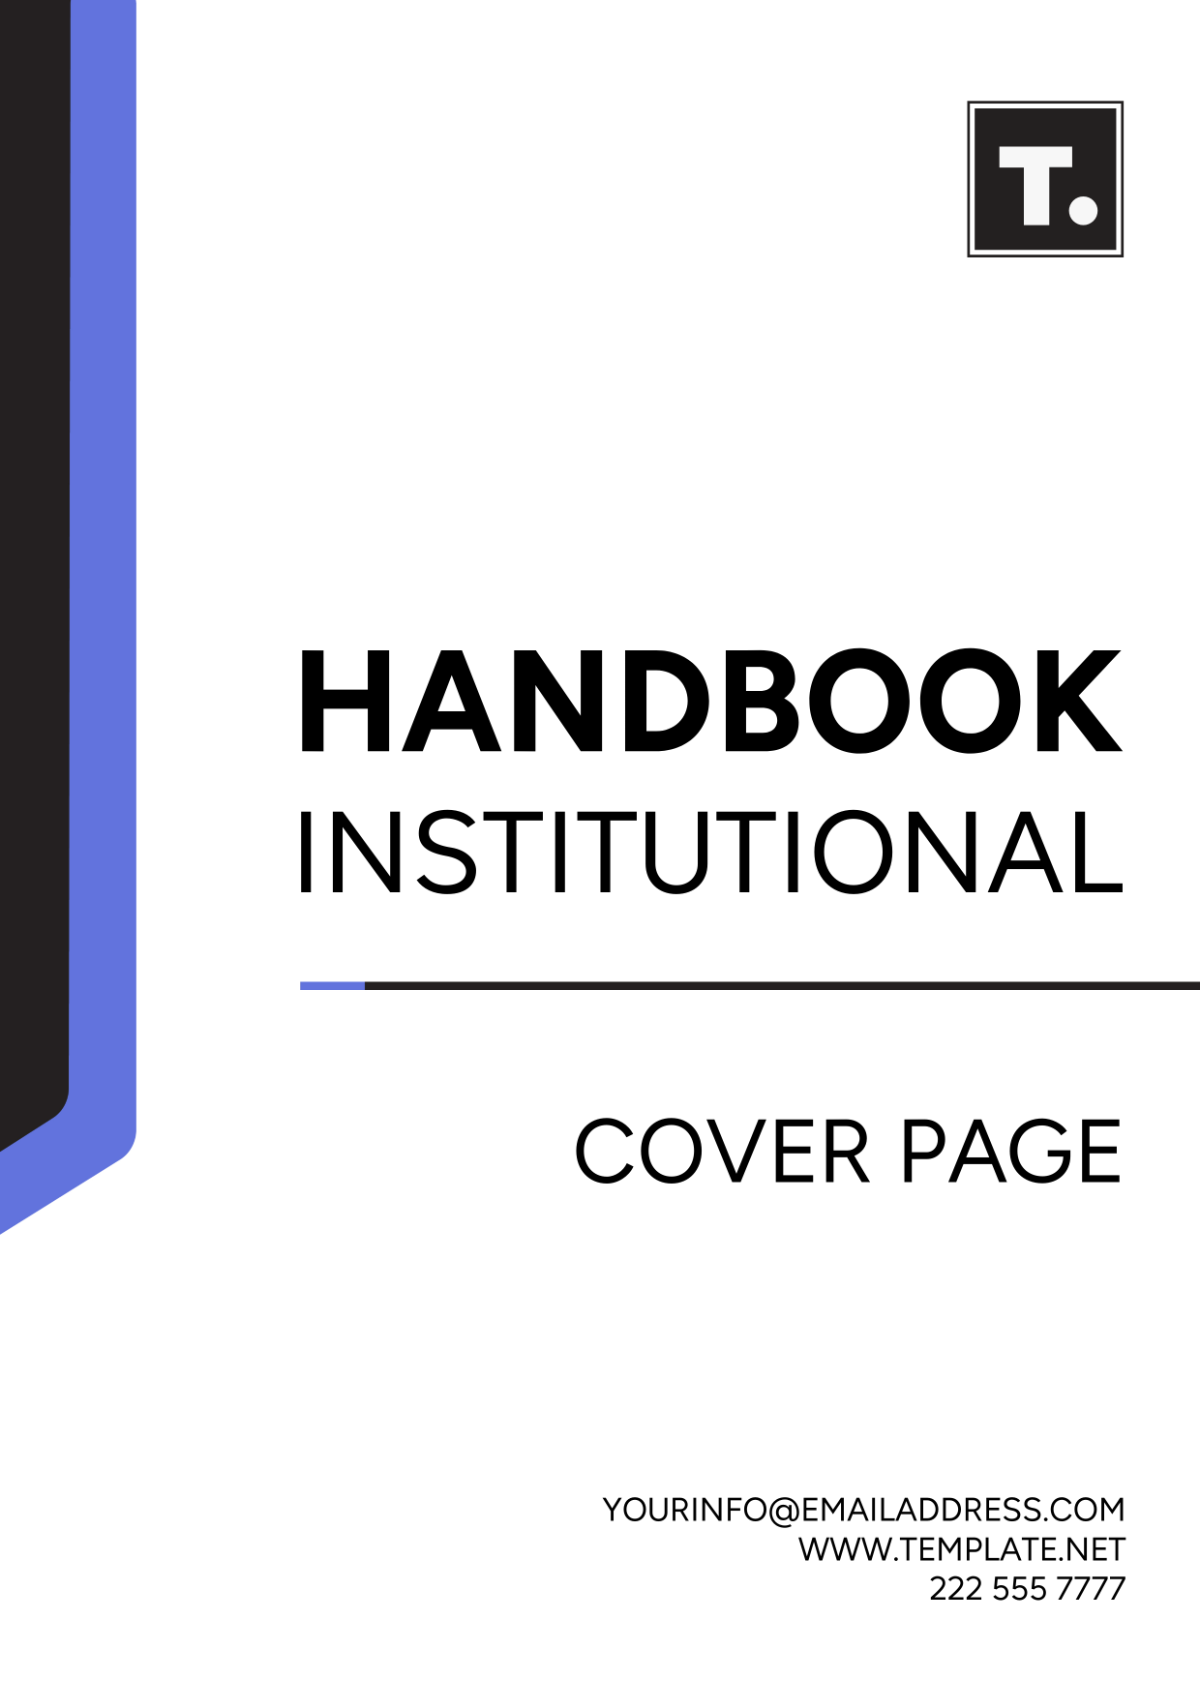 Free Handbook Institutional Cover Page Template